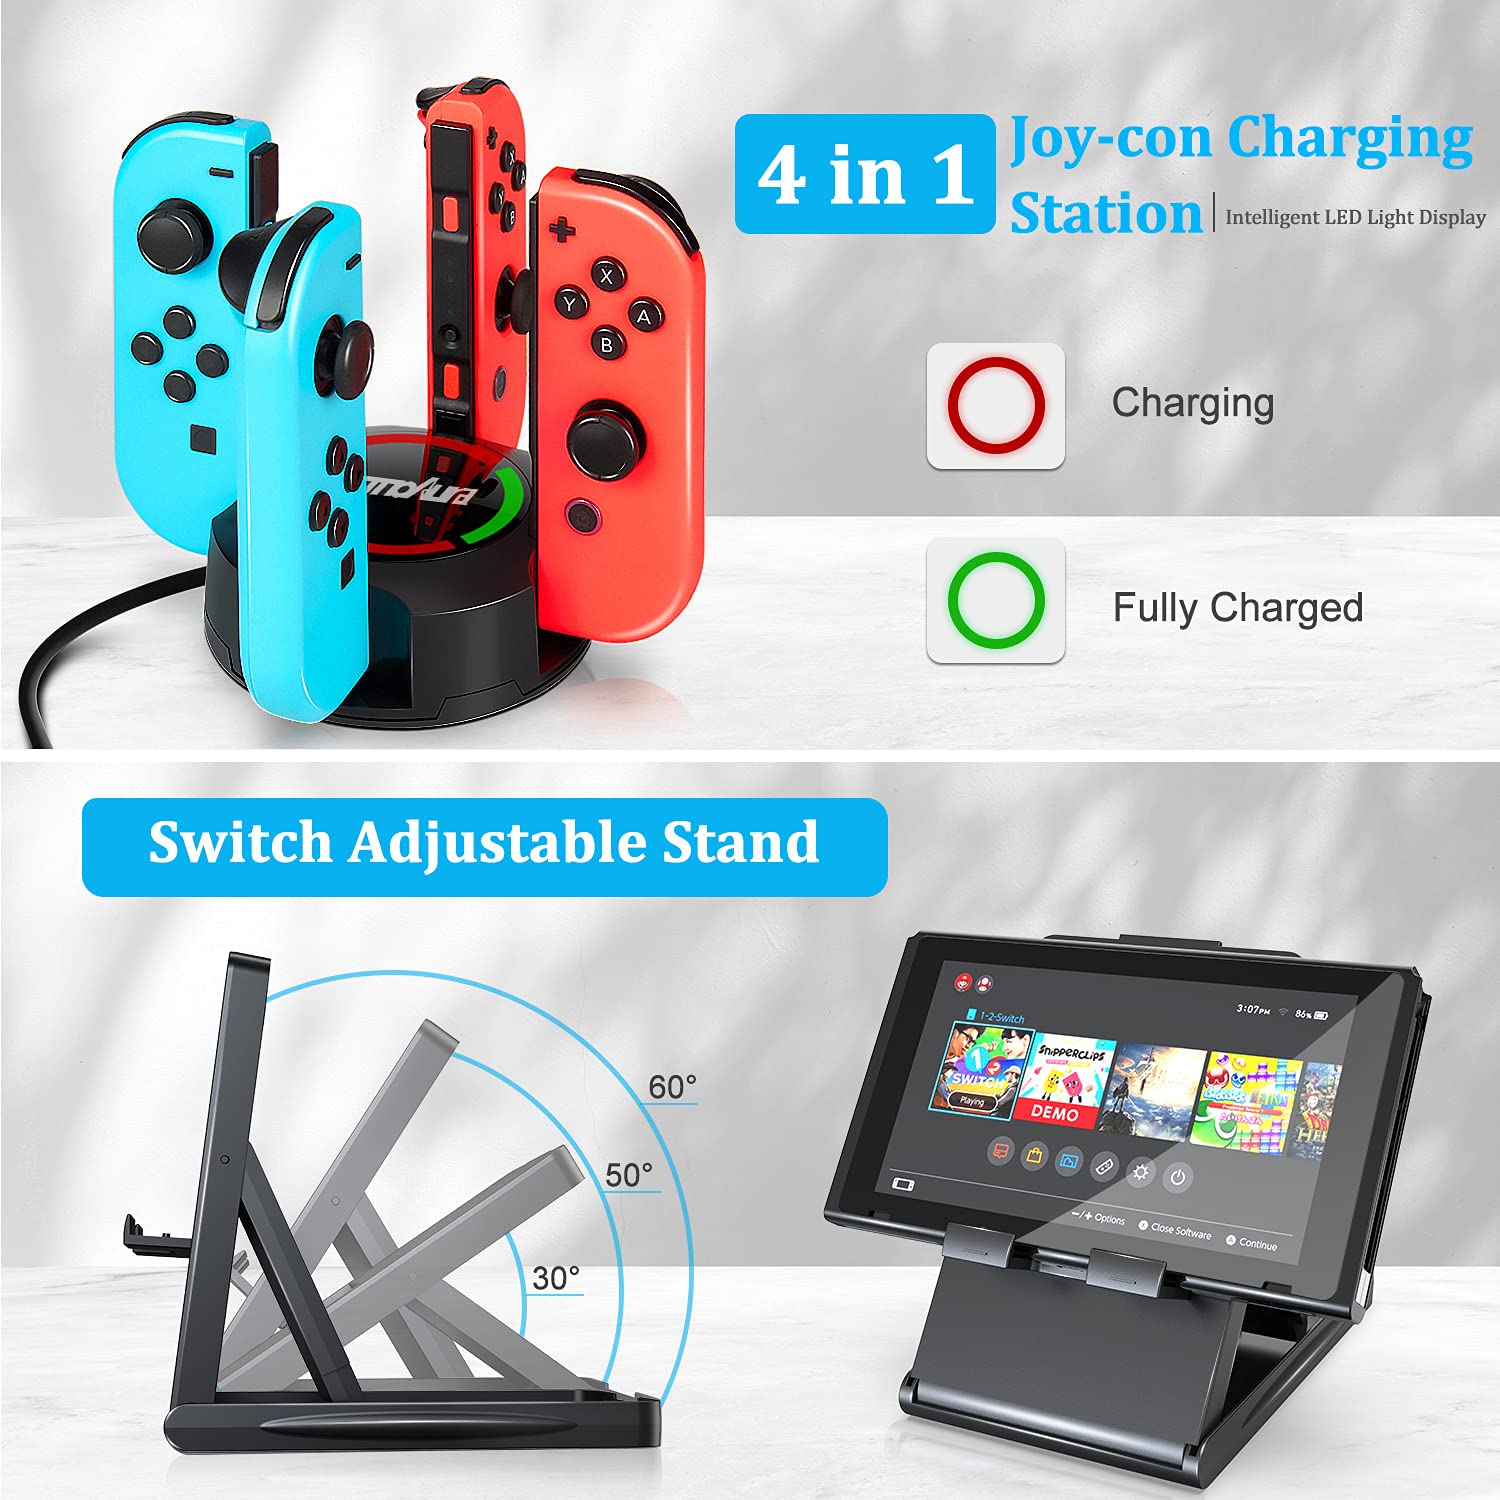 Switch Accessories Bundle, innoAura 20 in 1 Switch Accessories Kit Include Wrist Straps, Switch Carry Case, Joycon Charging Dock, Joycon Grips & Racing Wheels